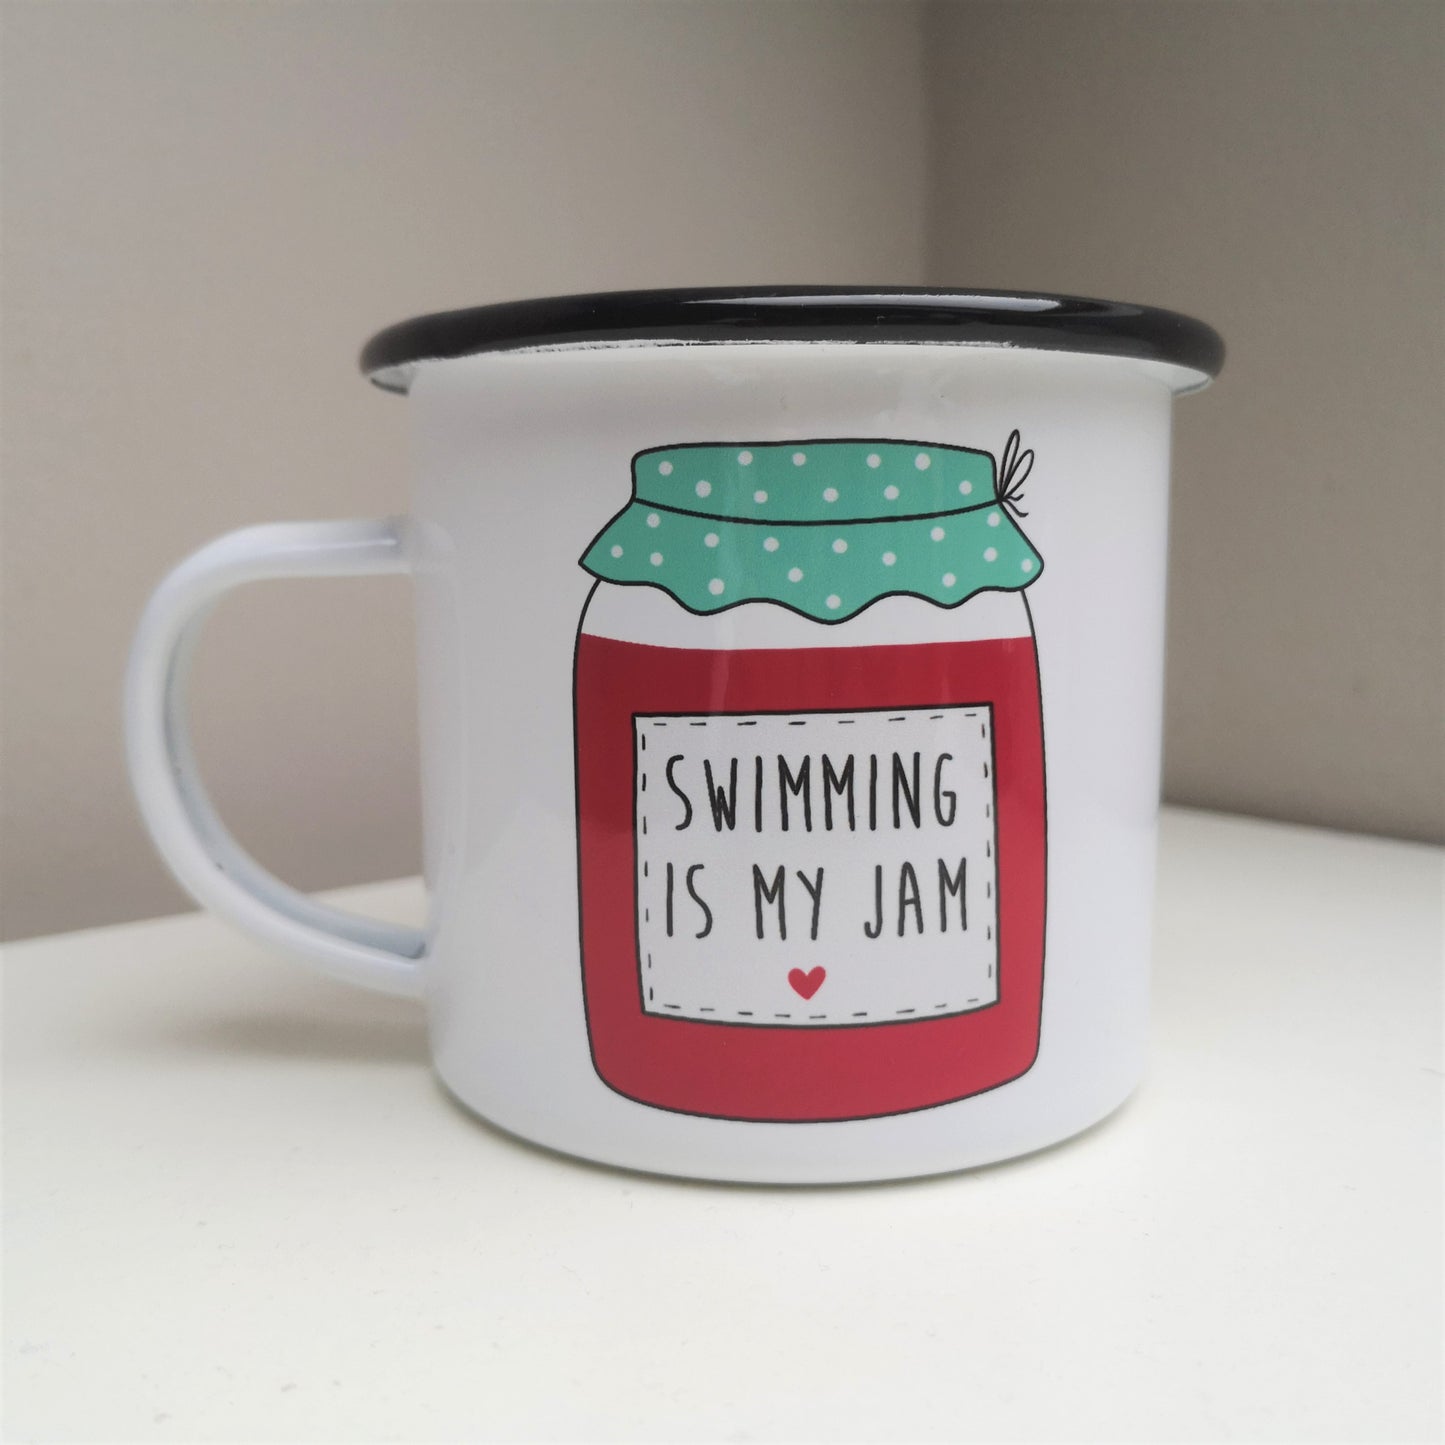 A White enamel mug with a black rim with a colourful red and green jam jar on the front, containing the following text - SWIMMING IS MY JAM